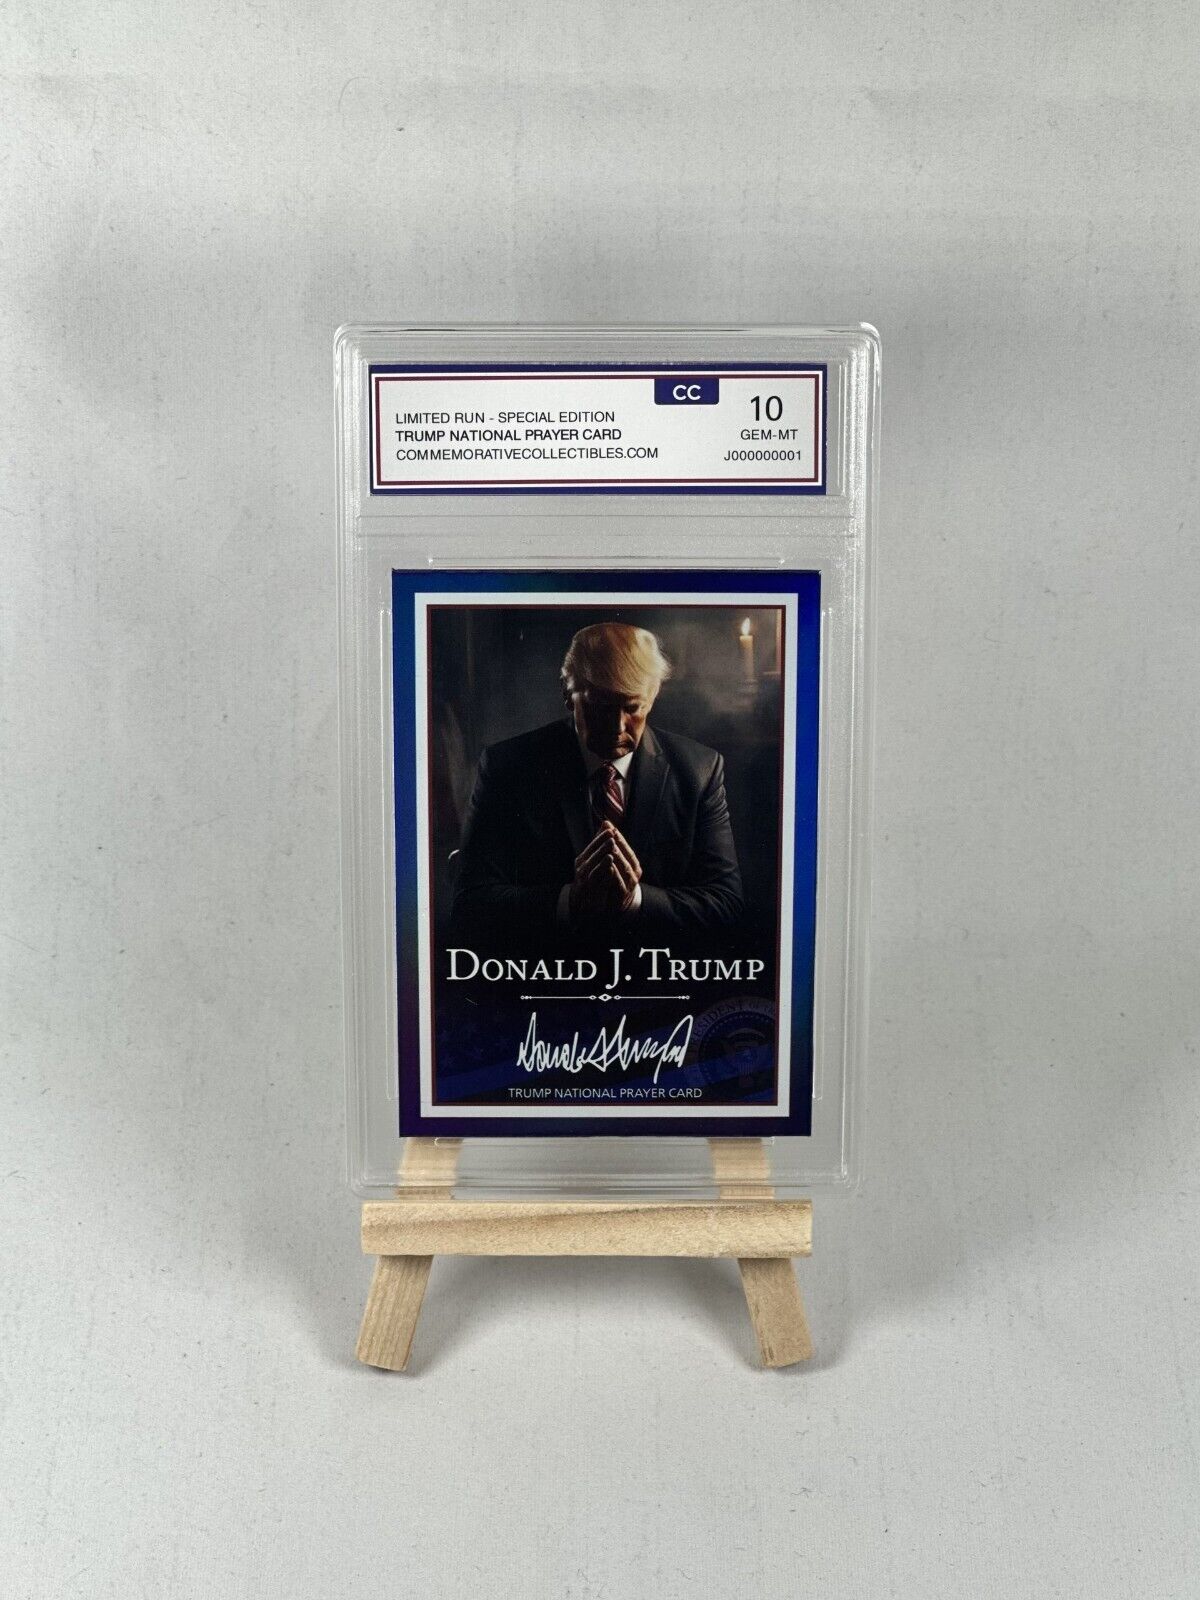 Holographic President Donald Trump Prayer Mint Condition Trading Card MAGA